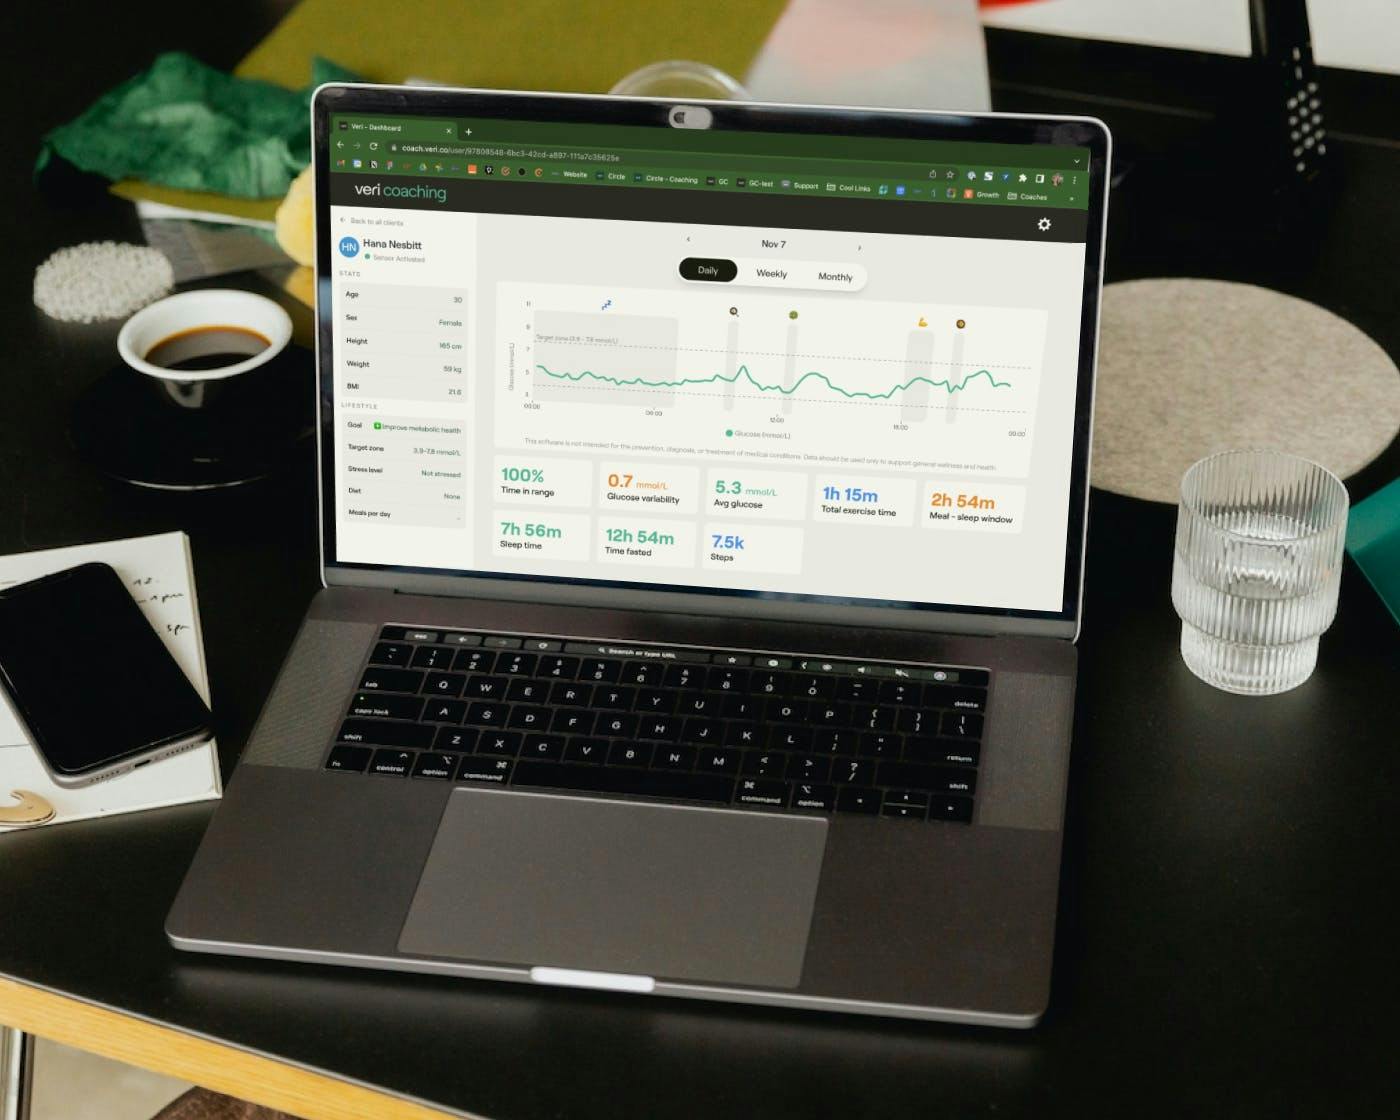 A laptop sits on a coach's desk, with the coaching web dashboard open on it, display a client's metabolic health data. 